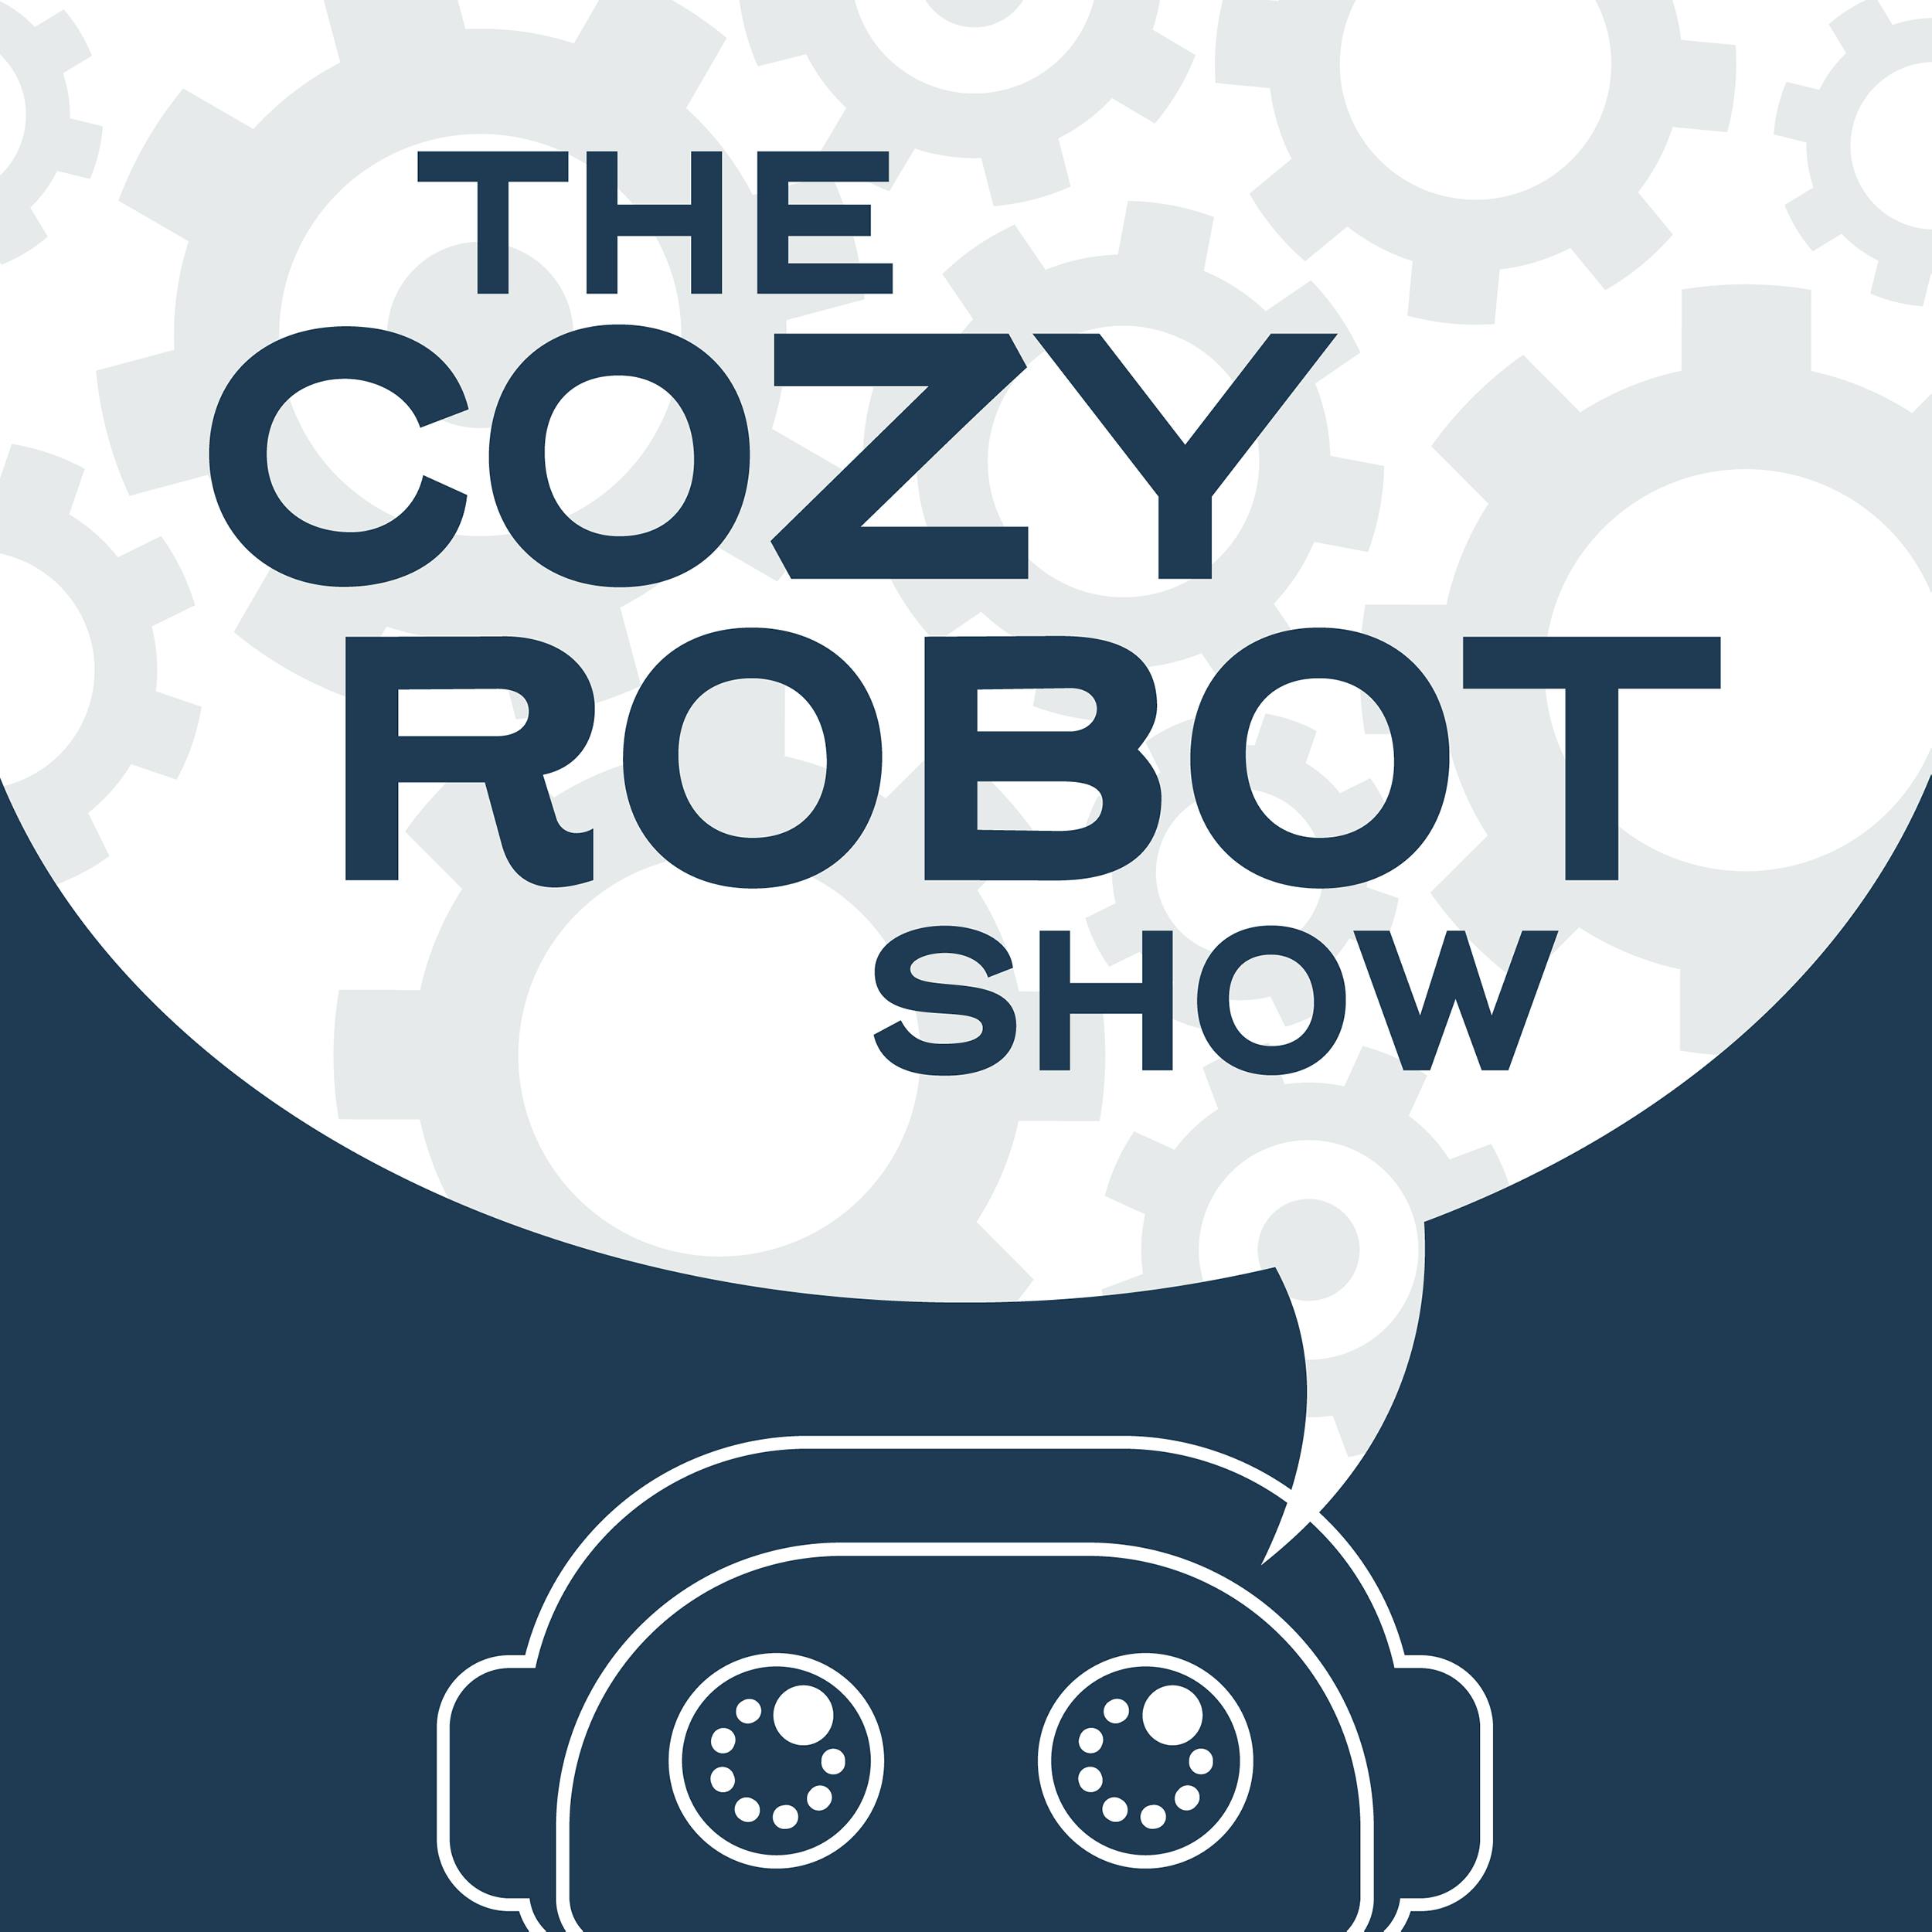 Cozy Robot Show: 2020 WAS A DUMPSTER FIRE (And Yet...Some Good Things Happened, Too?)